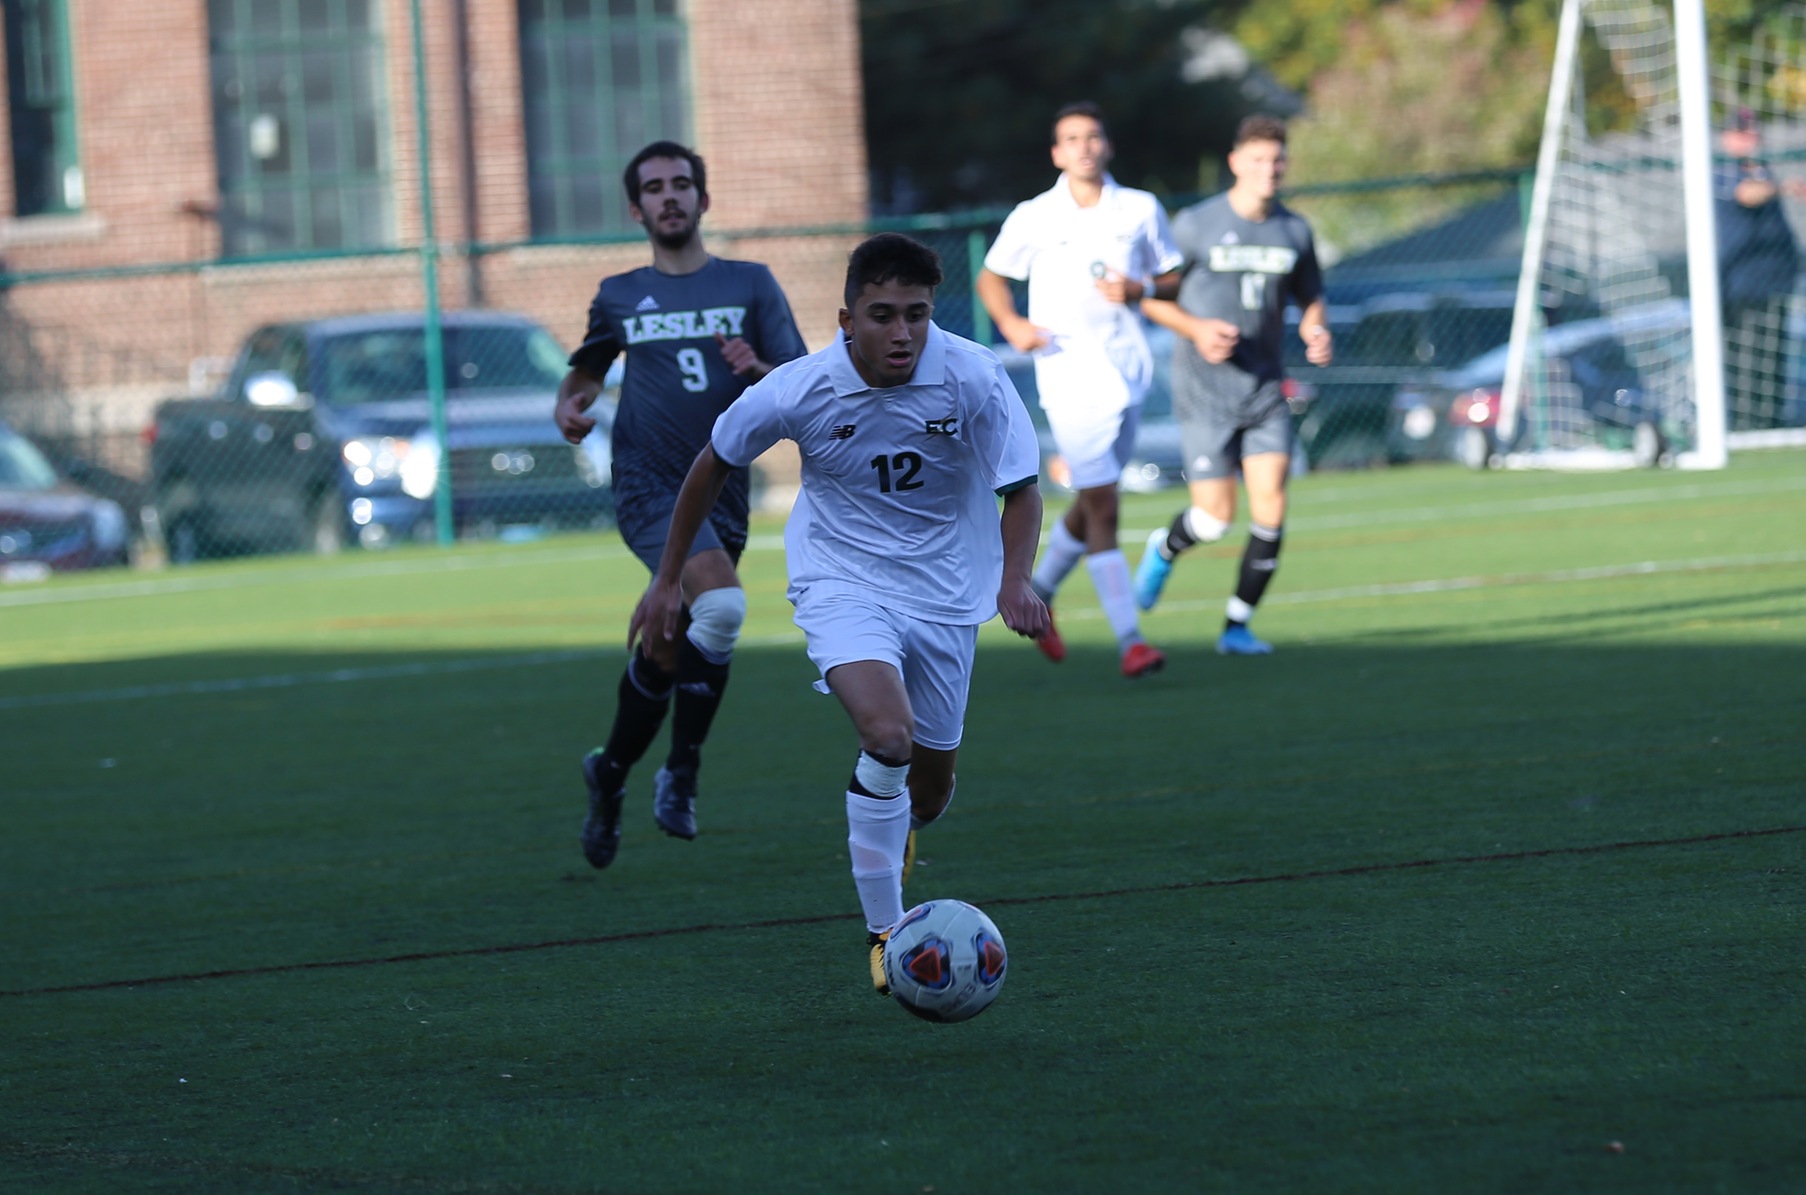 Men’s Soccer Ends Regular Season With Win Over Westfield State